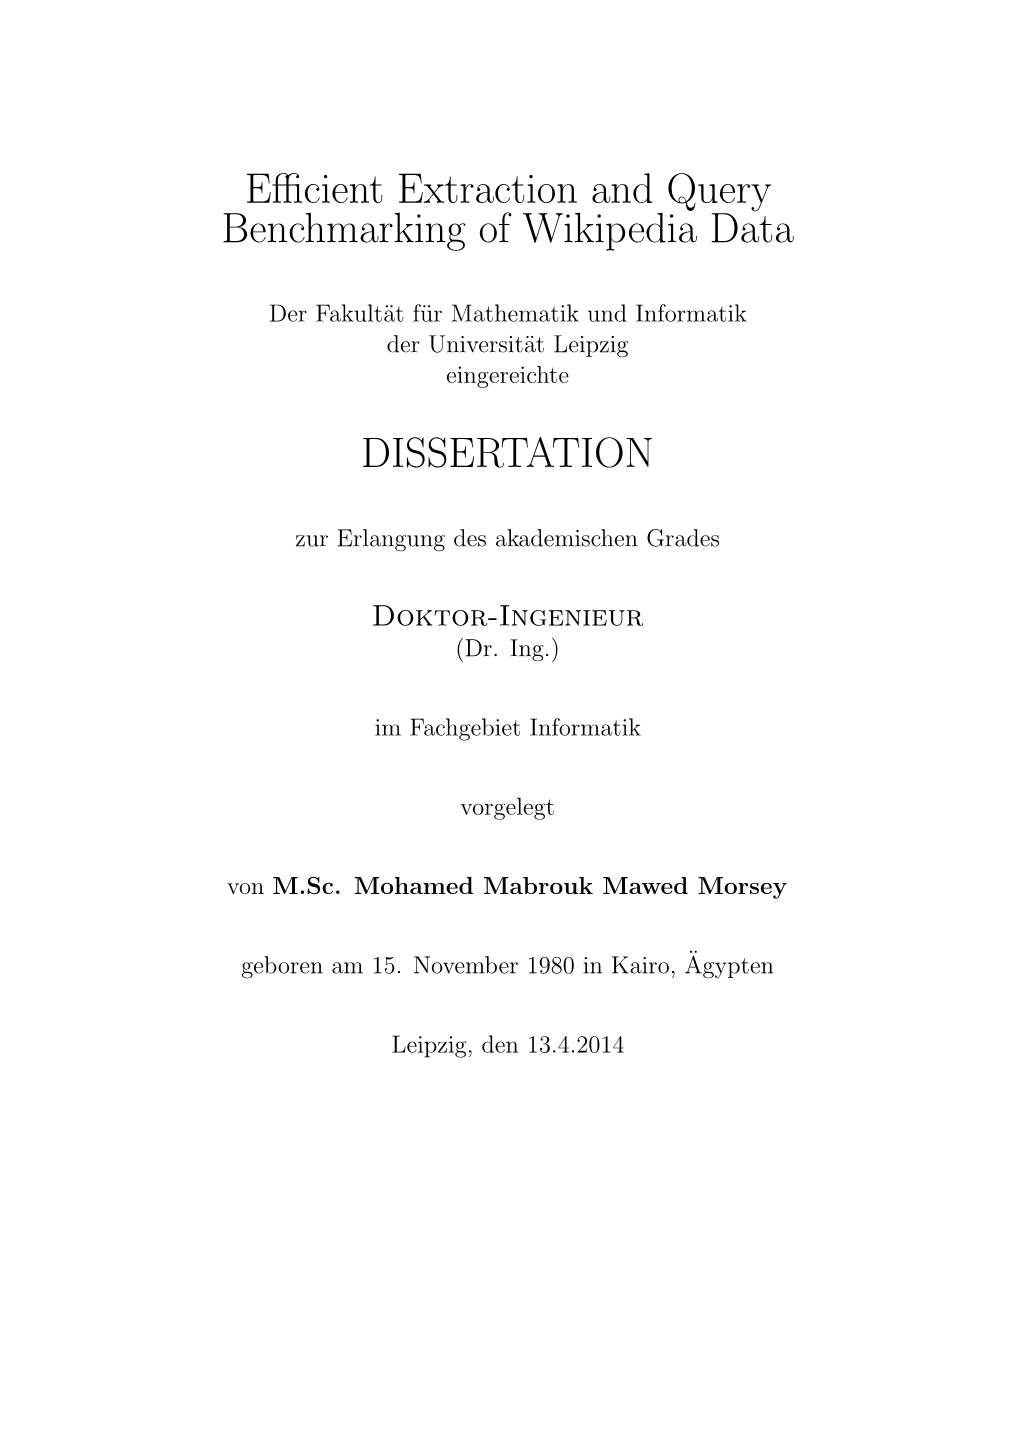 Efficient Extraction and Query Benchmarking of Wikipedia Data